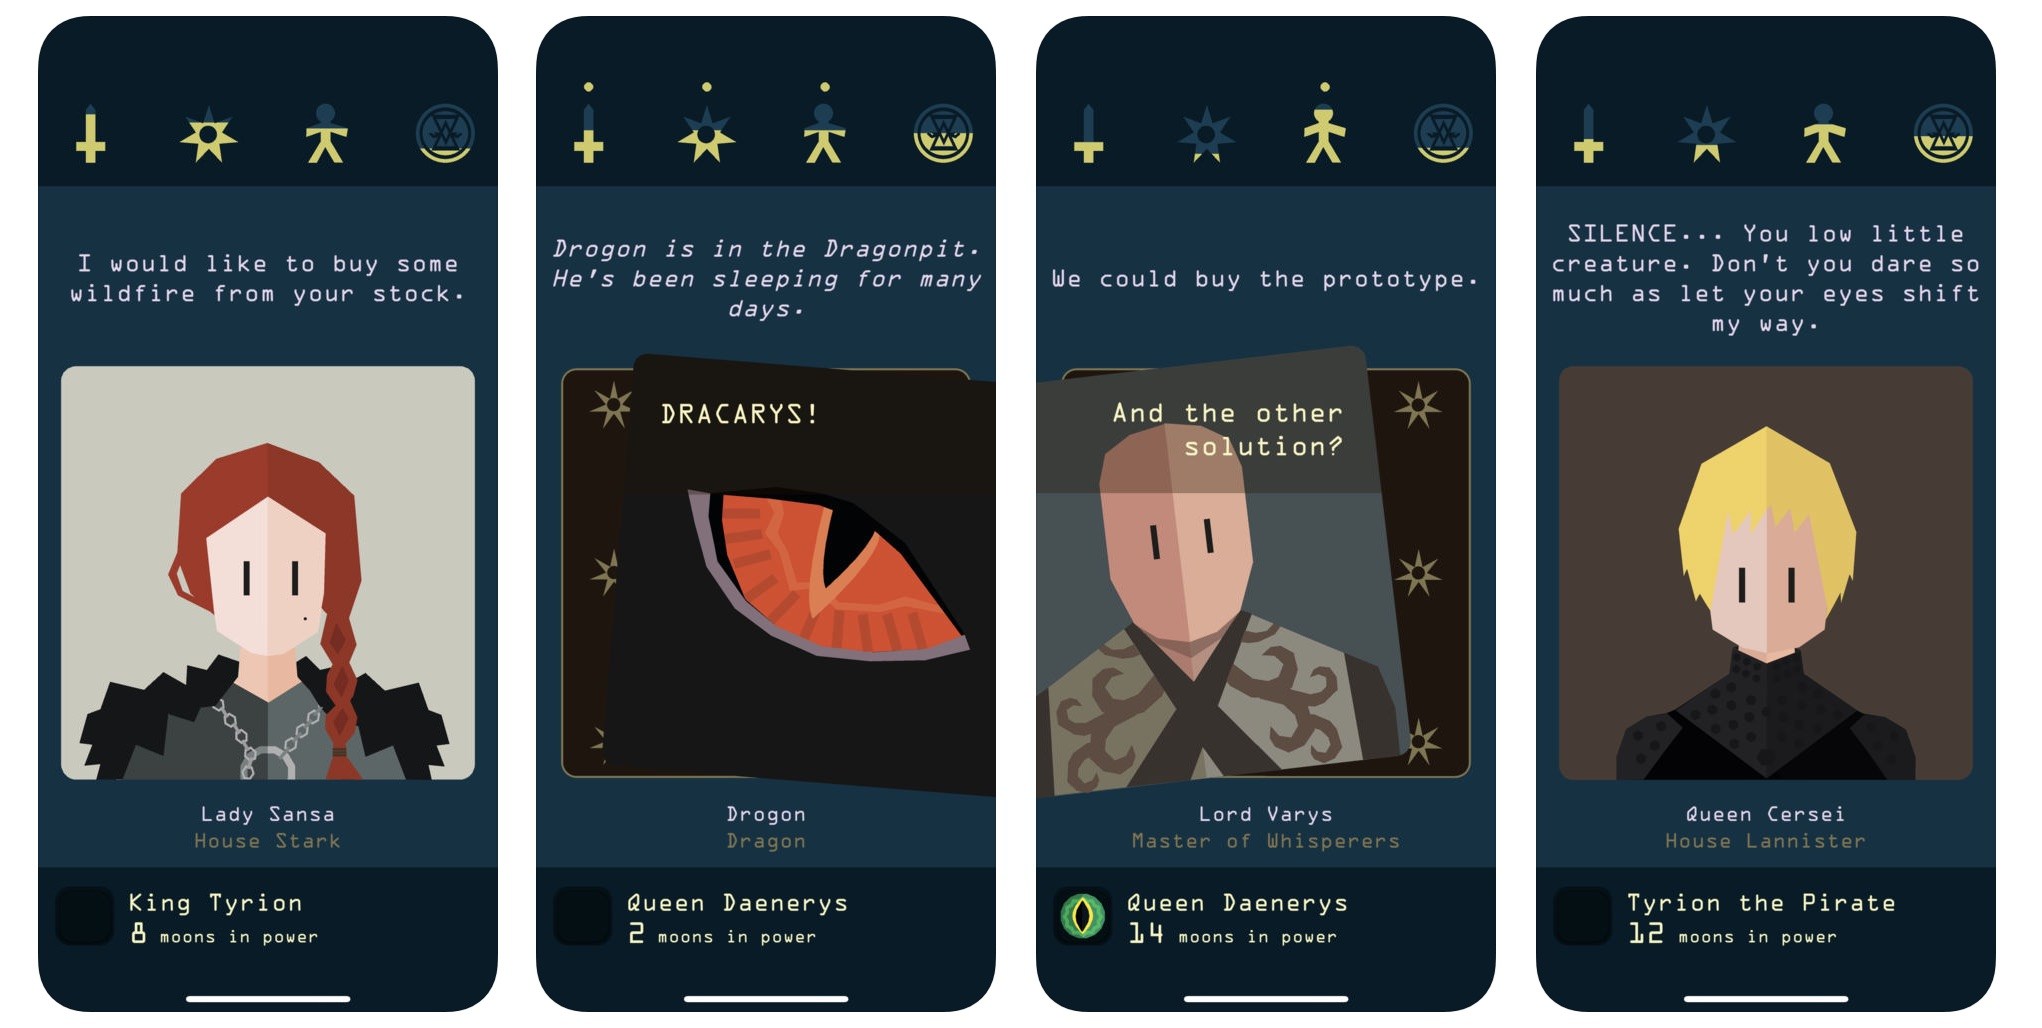 Download Reigns Game of Thrones Free Apk Link